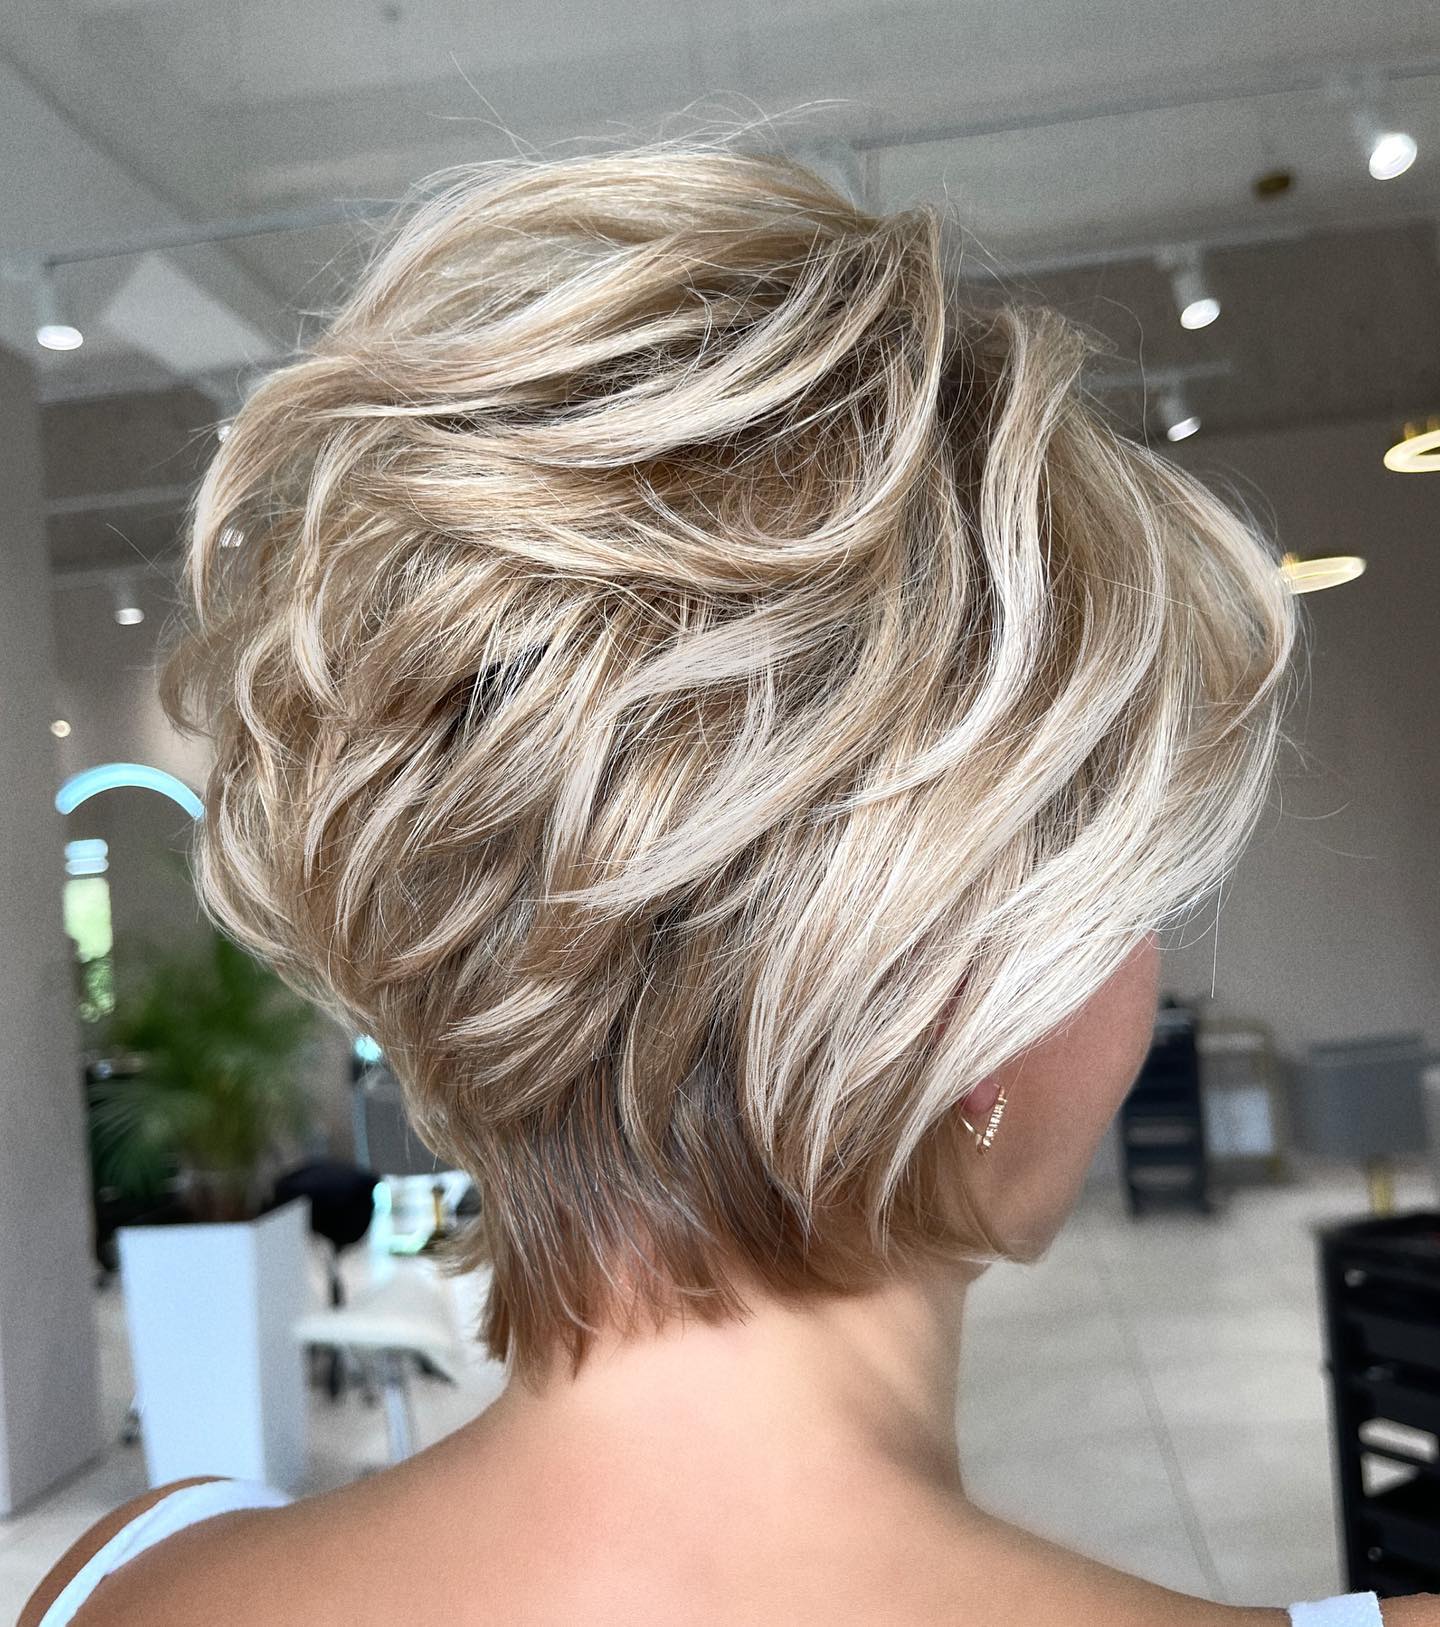 Champagne Blonde Hair Color on Pixie Cut